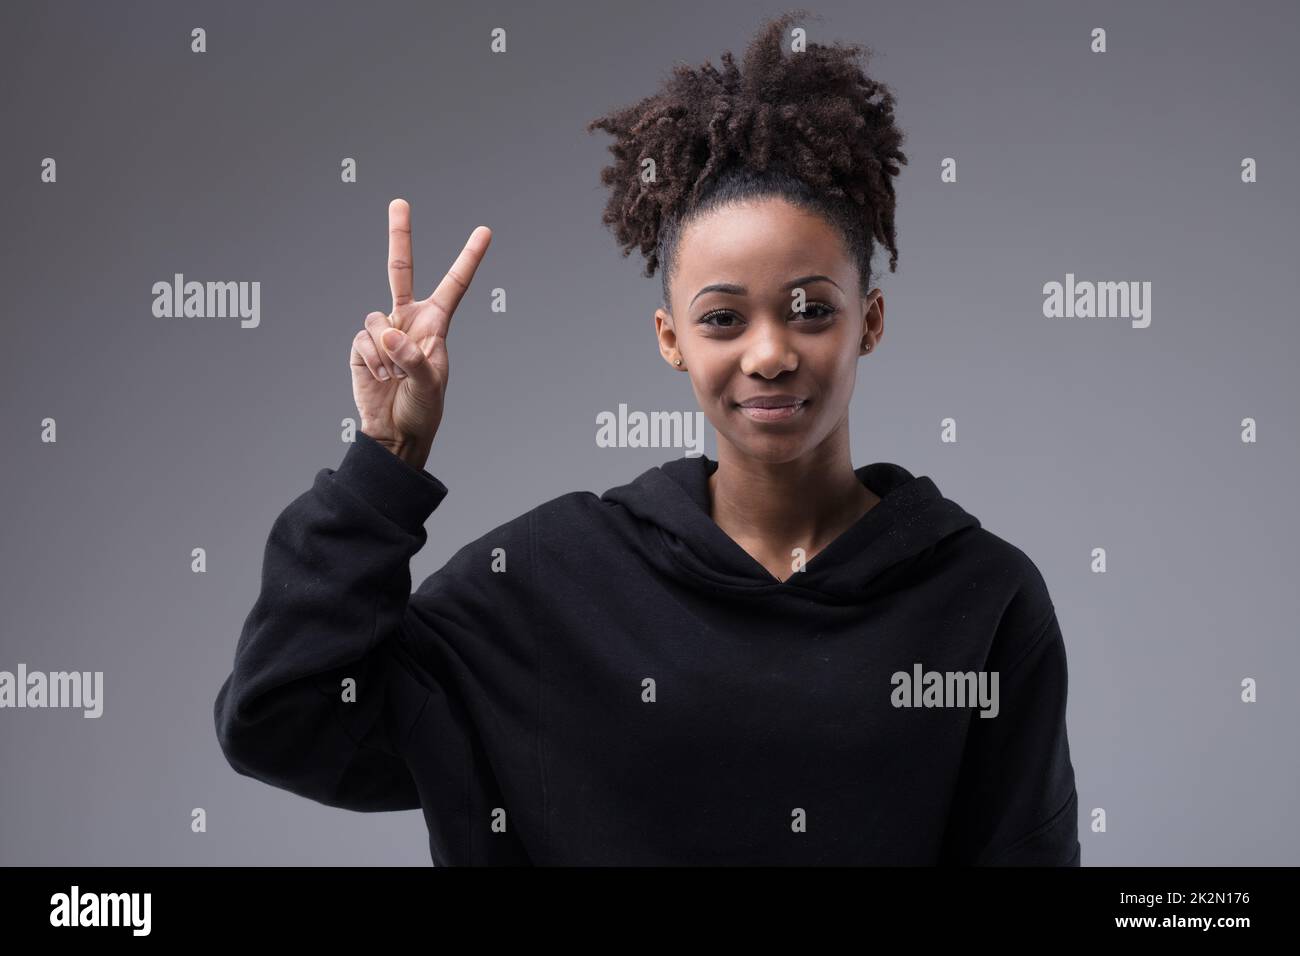 victory hand sigh made by a young beautiful smiling afroamerican woman with afro hairstyle Stock Photo